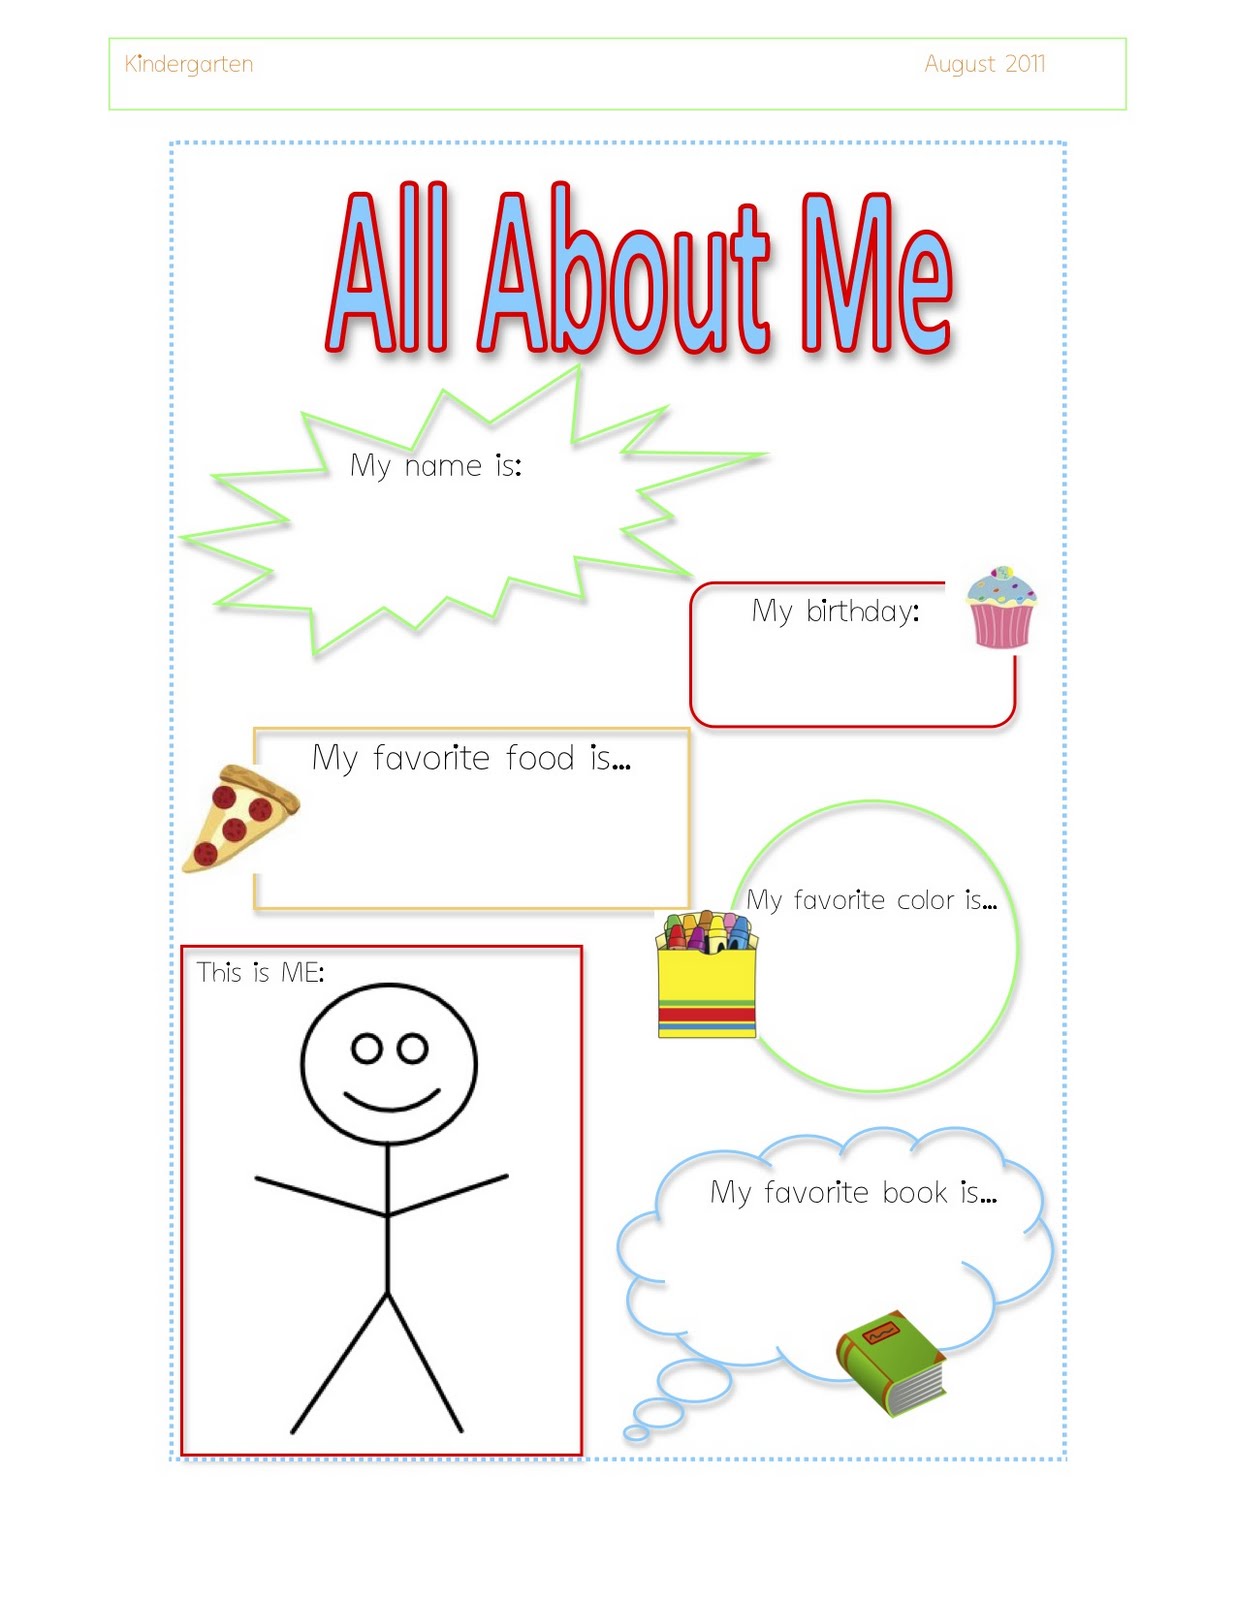 Preschool Printable All About Me Images Frompo